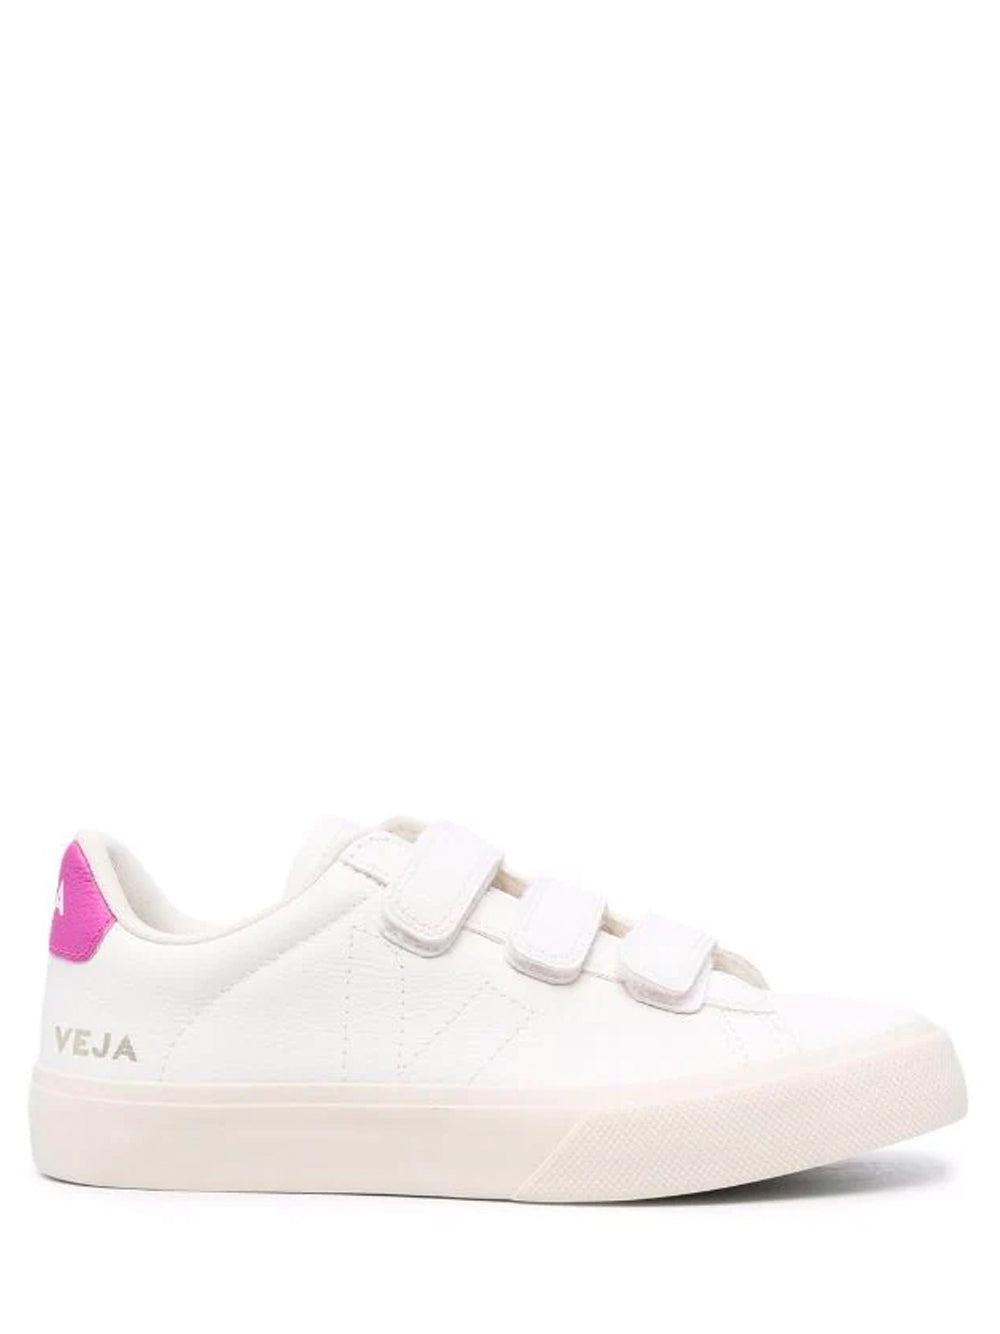 Veja Campo Touch-strap Sneakers Extra Ultra Violet in White | Lyst